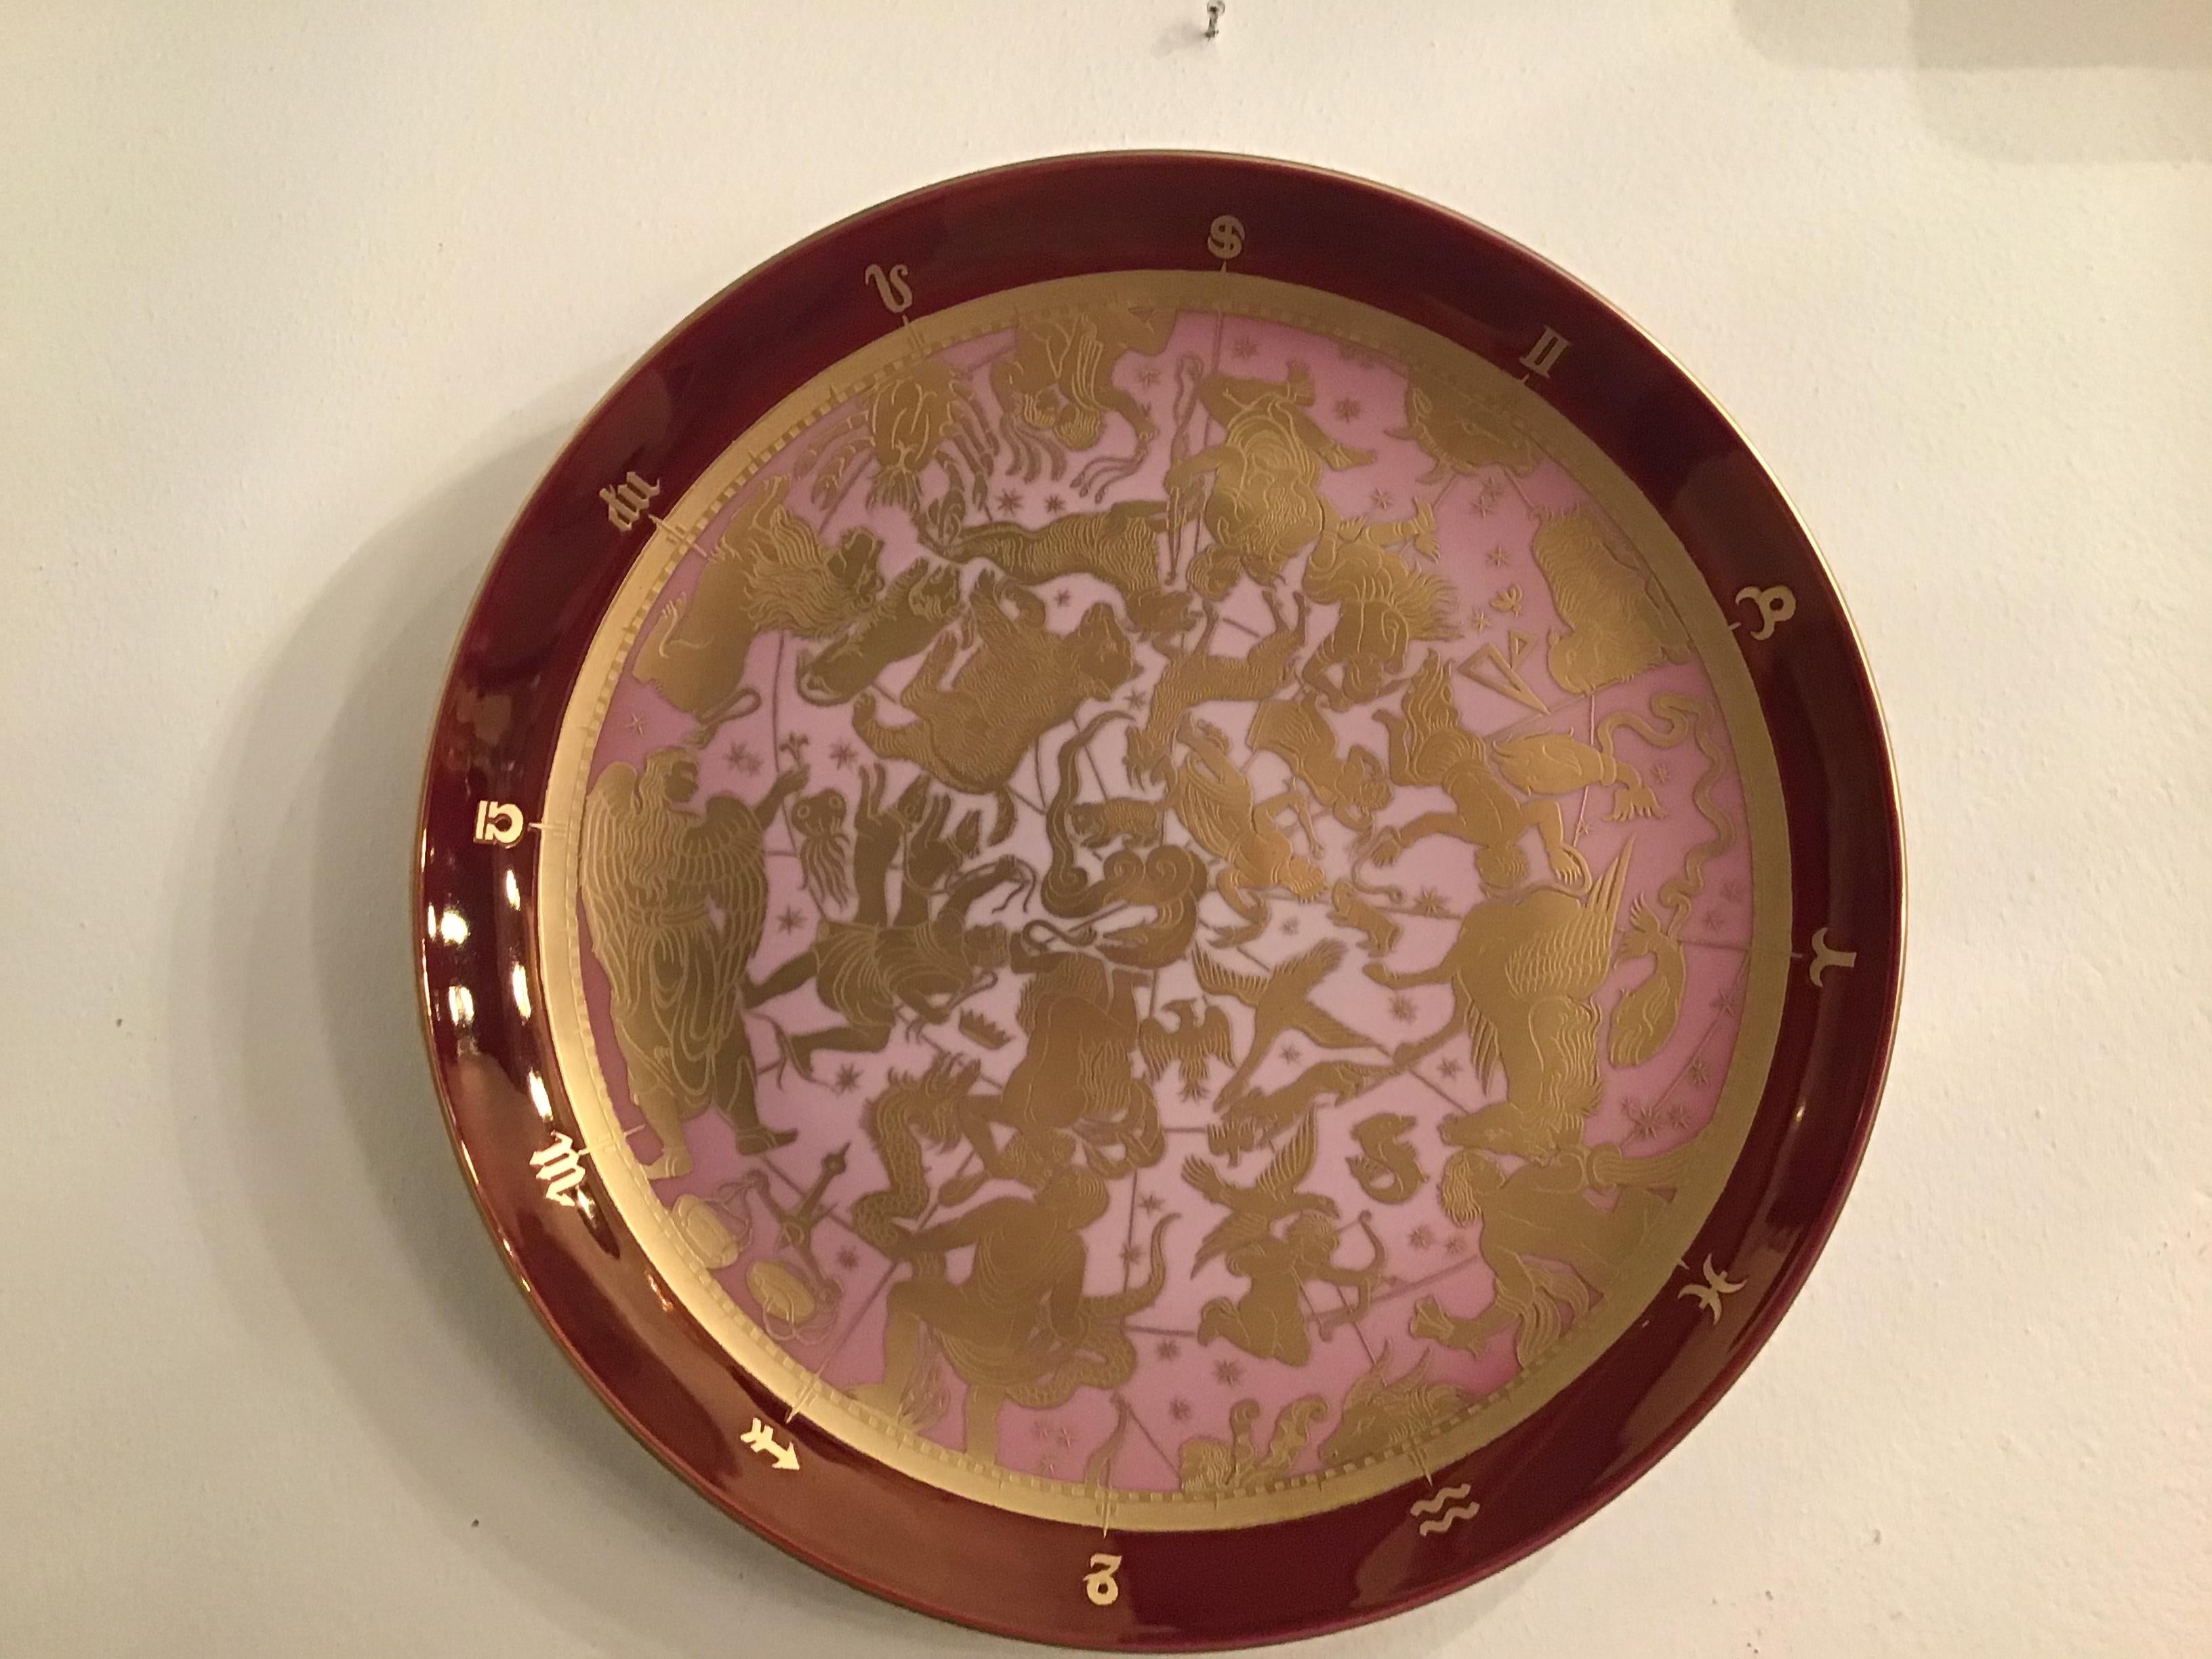 Morbelli Porcelain Wall Plate “Planisfero Celeste” Worked with Pure Gold 1960 It In Excellent Condition For Sale In Milano, IT